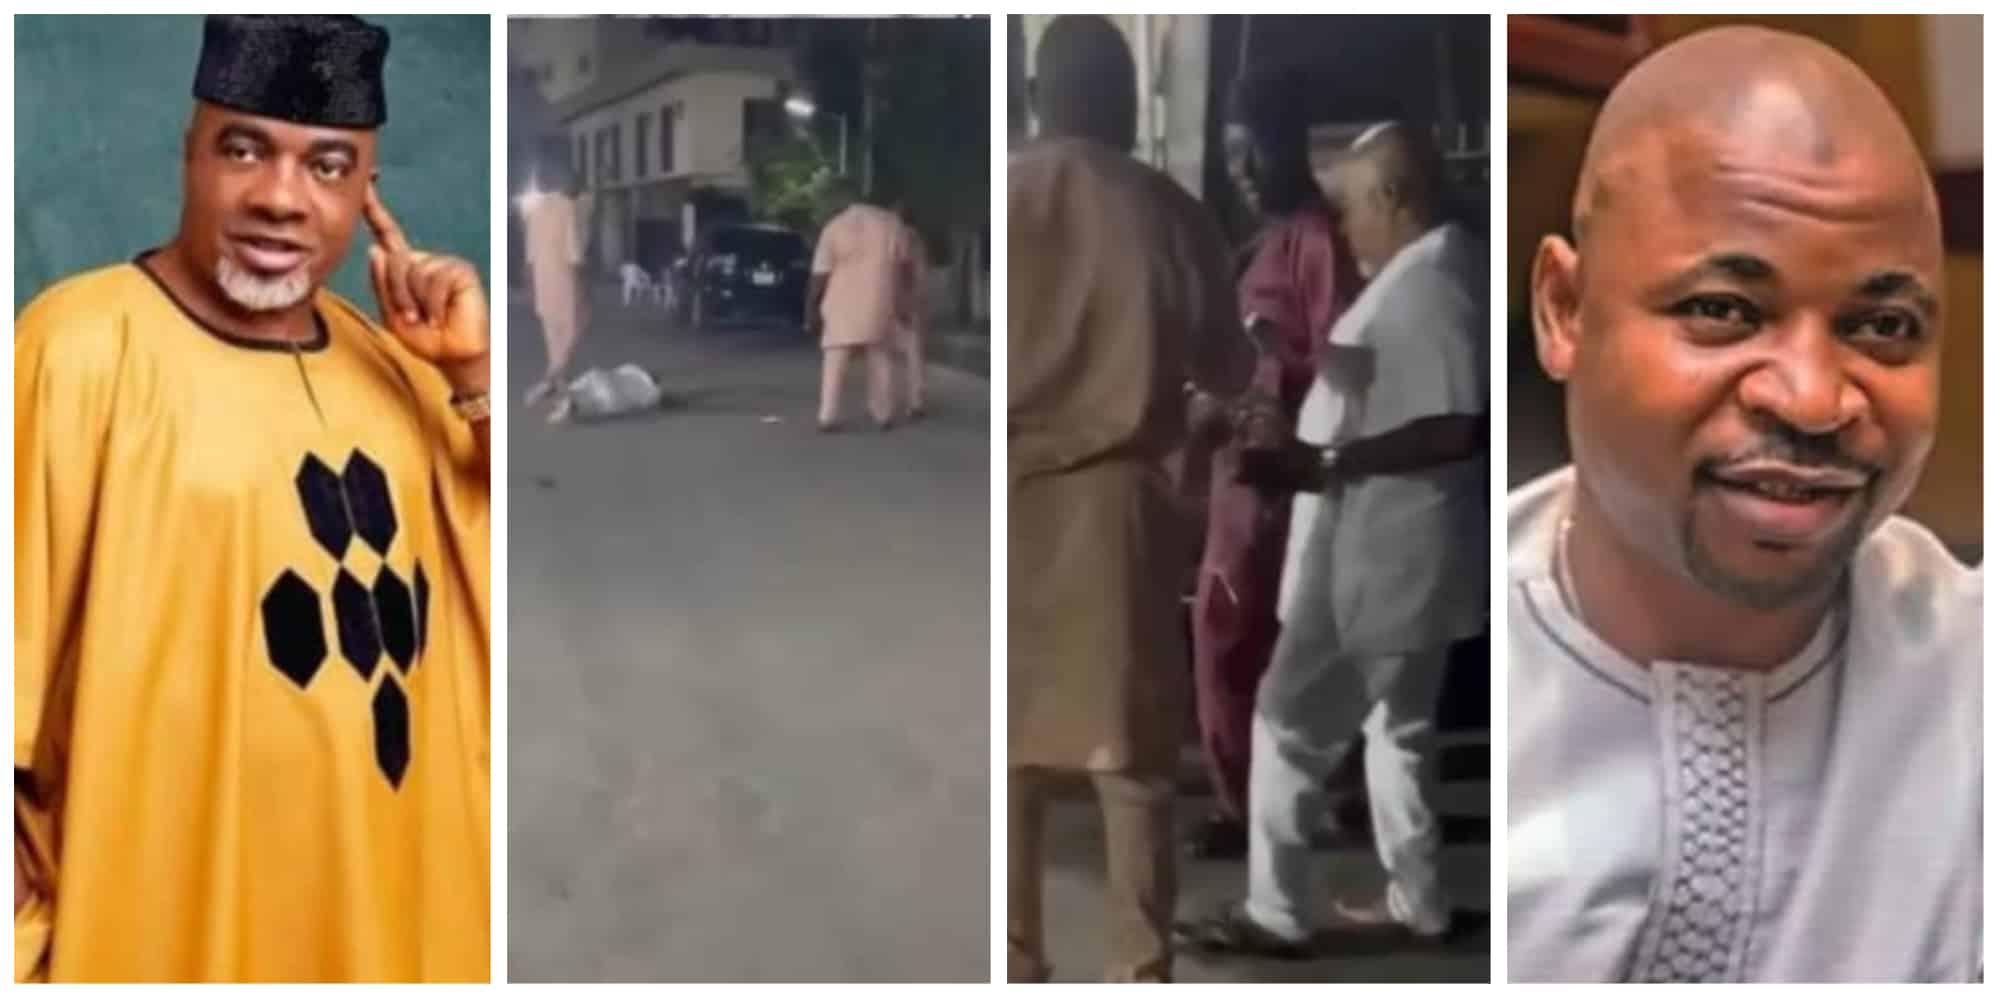 Veteran Actor Olaiya Igwe Prostrates, Rolls On The Floor For MC Oluomo After Surprise Car Gift (Video)